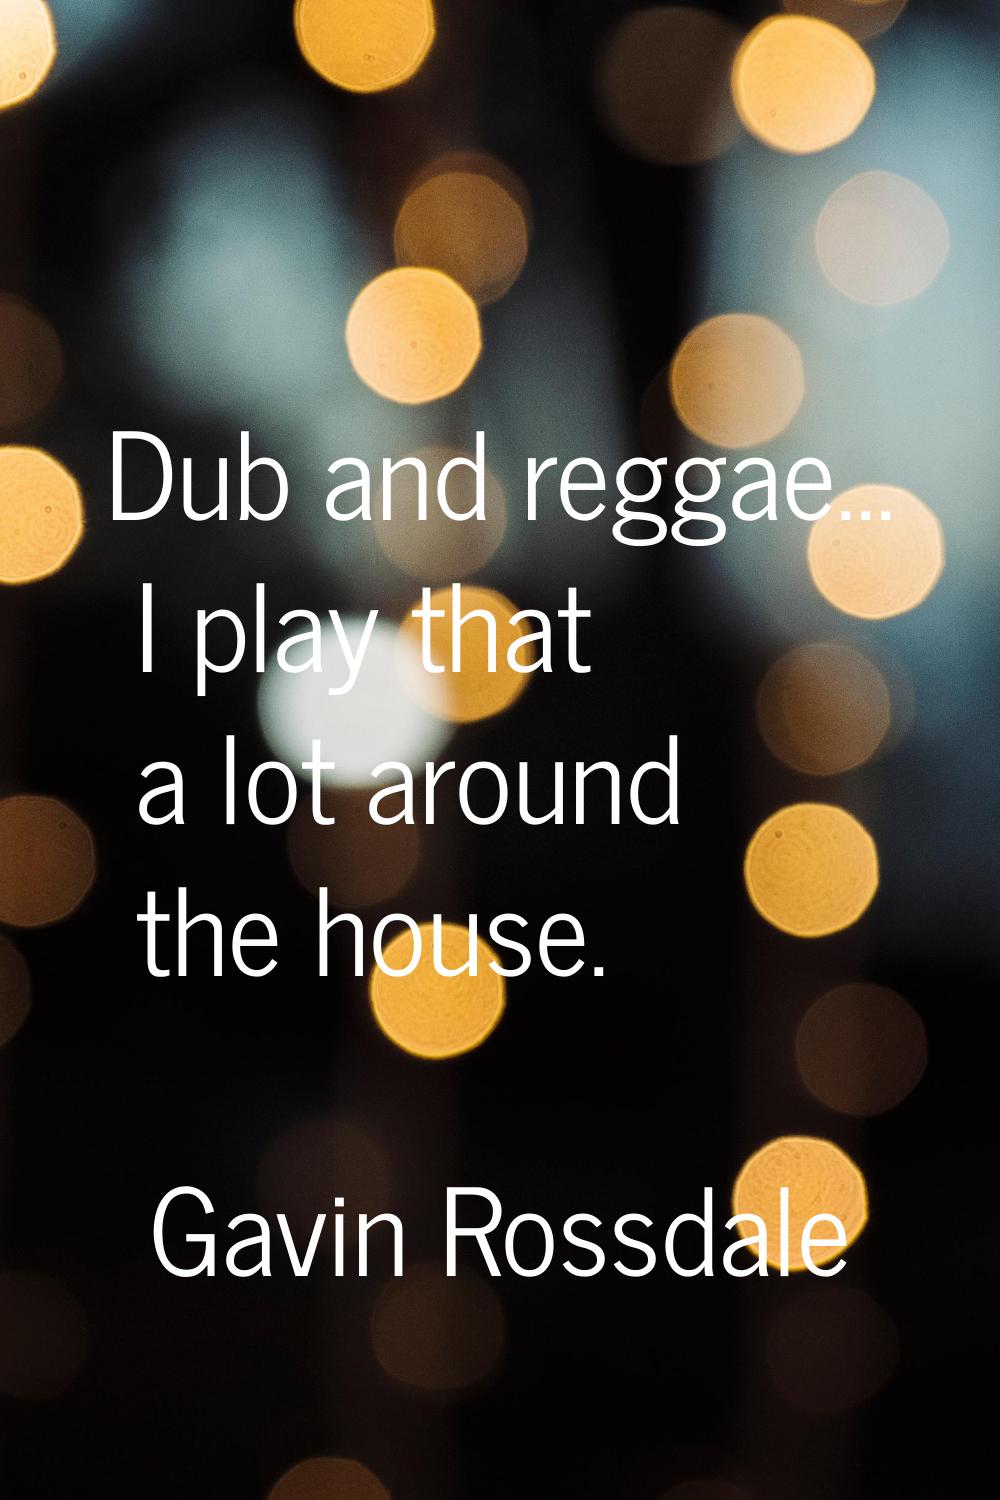 Dub and reggae... I play that a lot around the house.